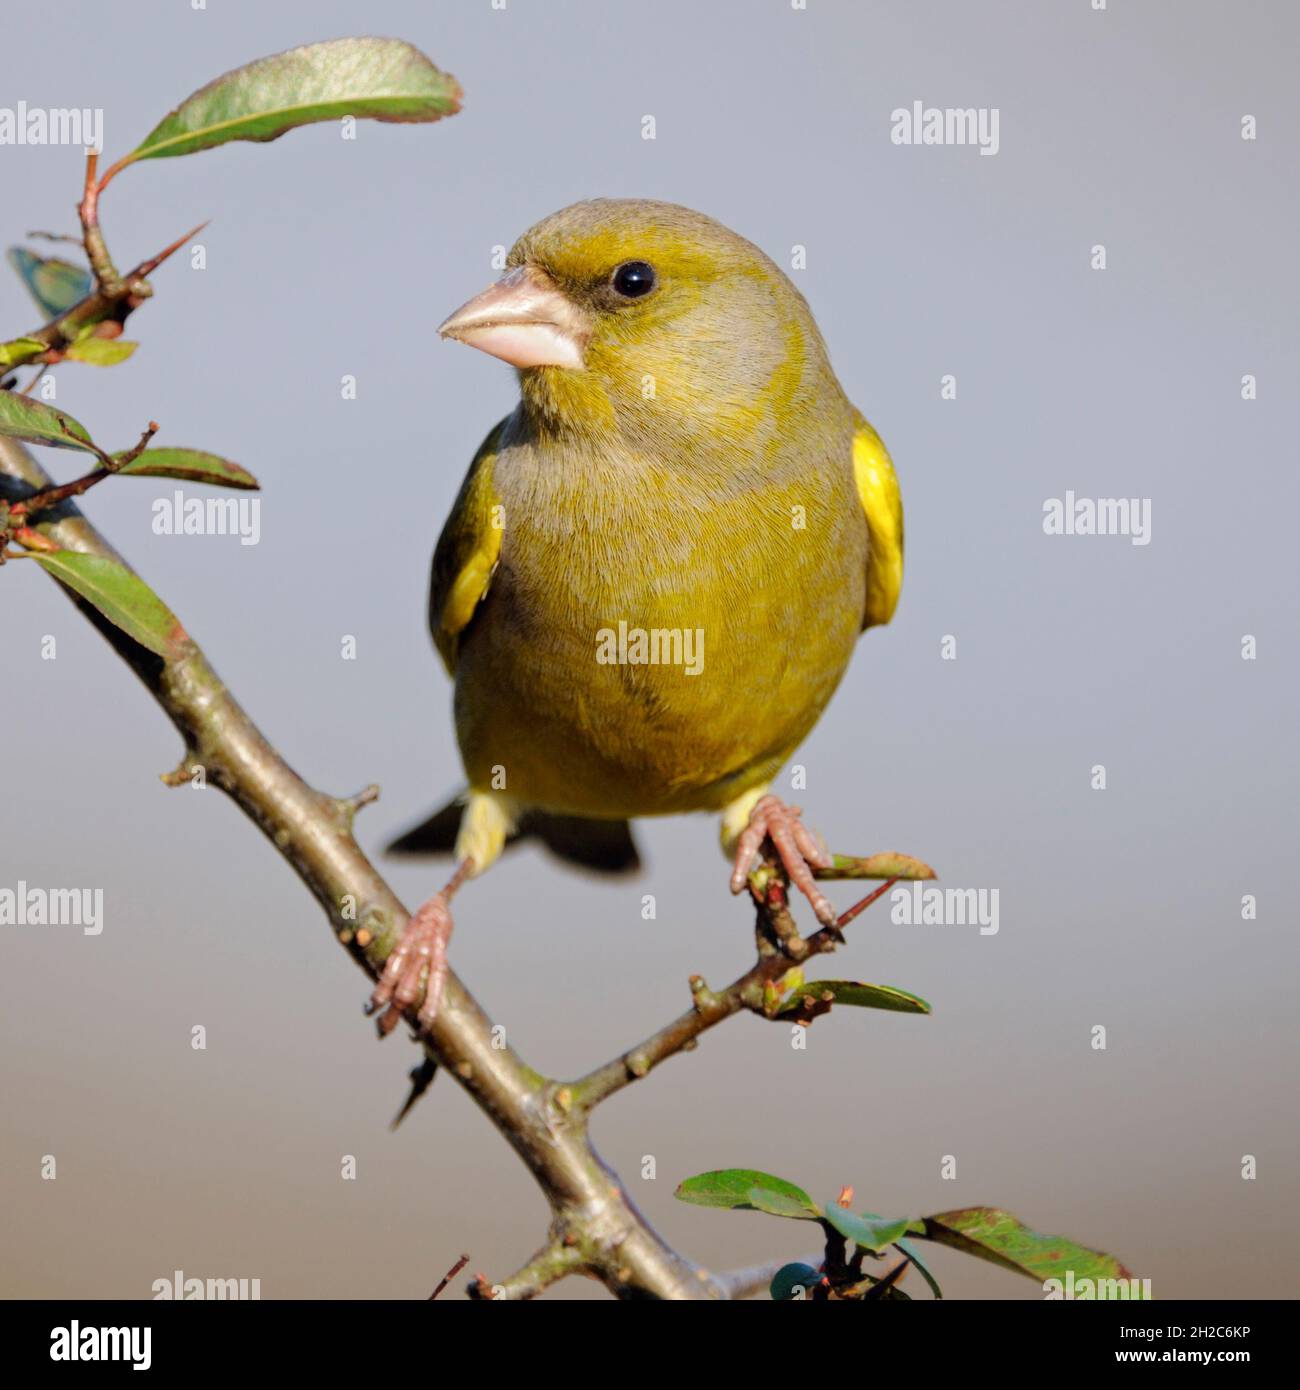 European Greenfinch ( Carduelis chloris ), male bird, perched on a thorny branch, watching around attentively, frontal view, wildlife, Europe. Stock Photo